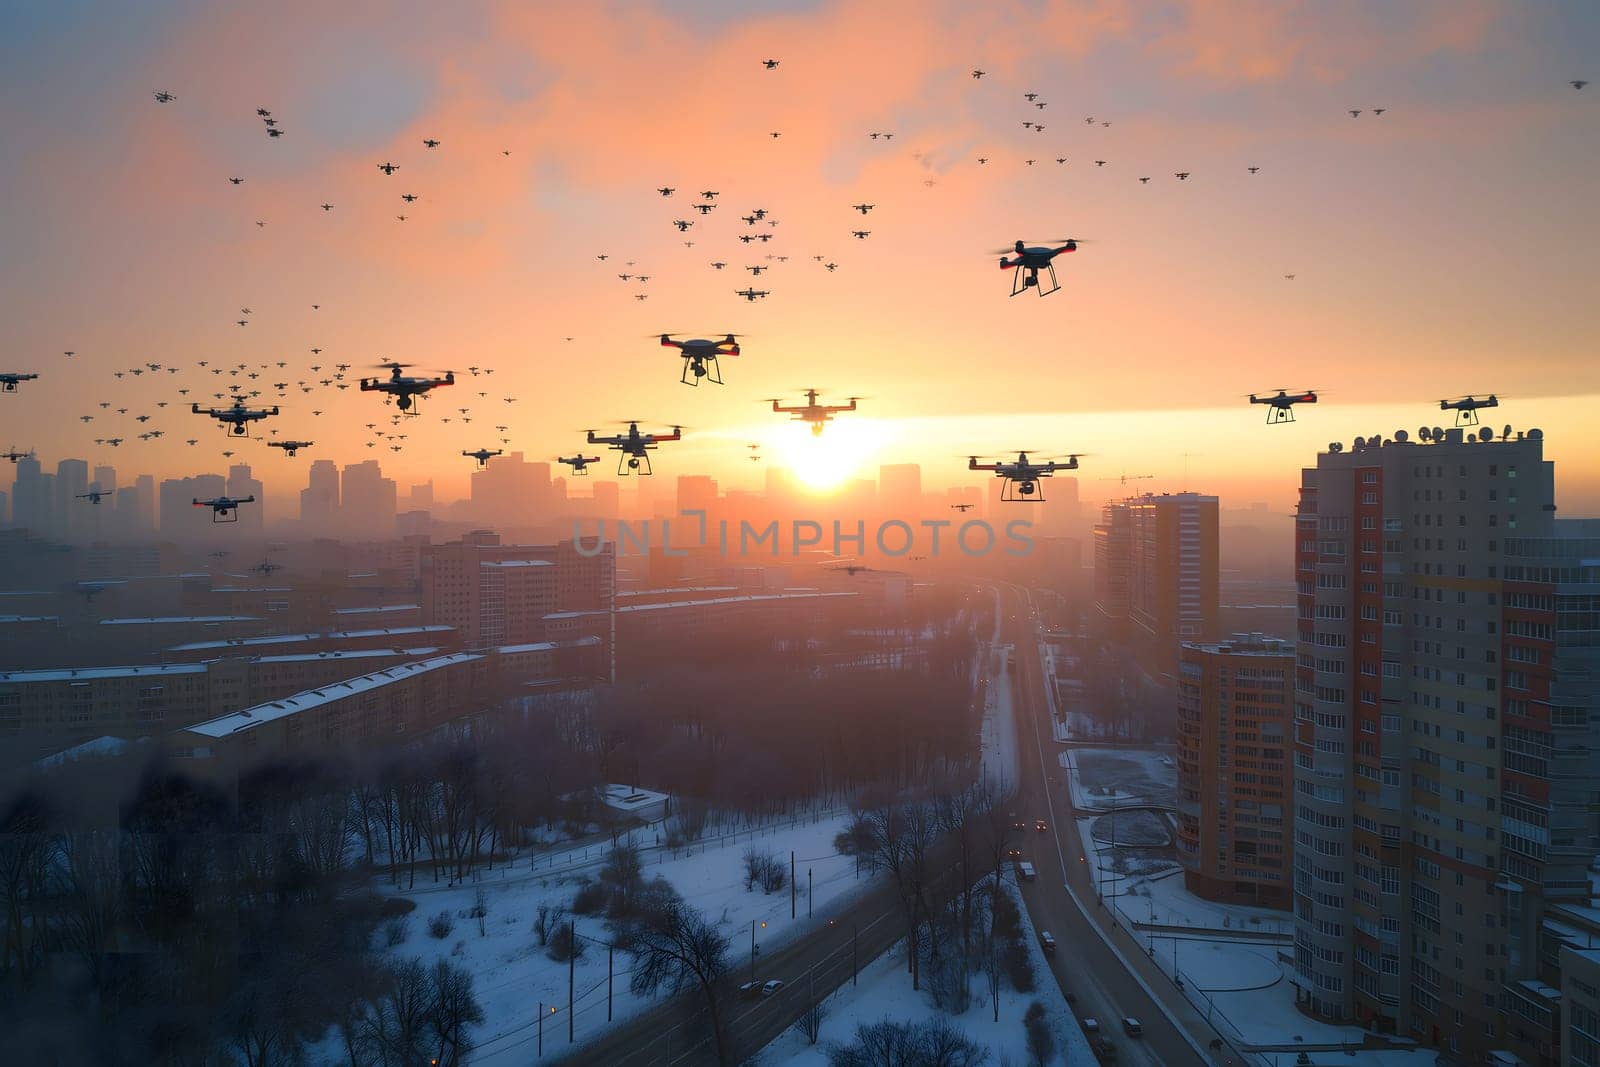 swarm of drones over city at winter sunset or sunrise. Neural network generated image. Not based on any actual scene or pattern.